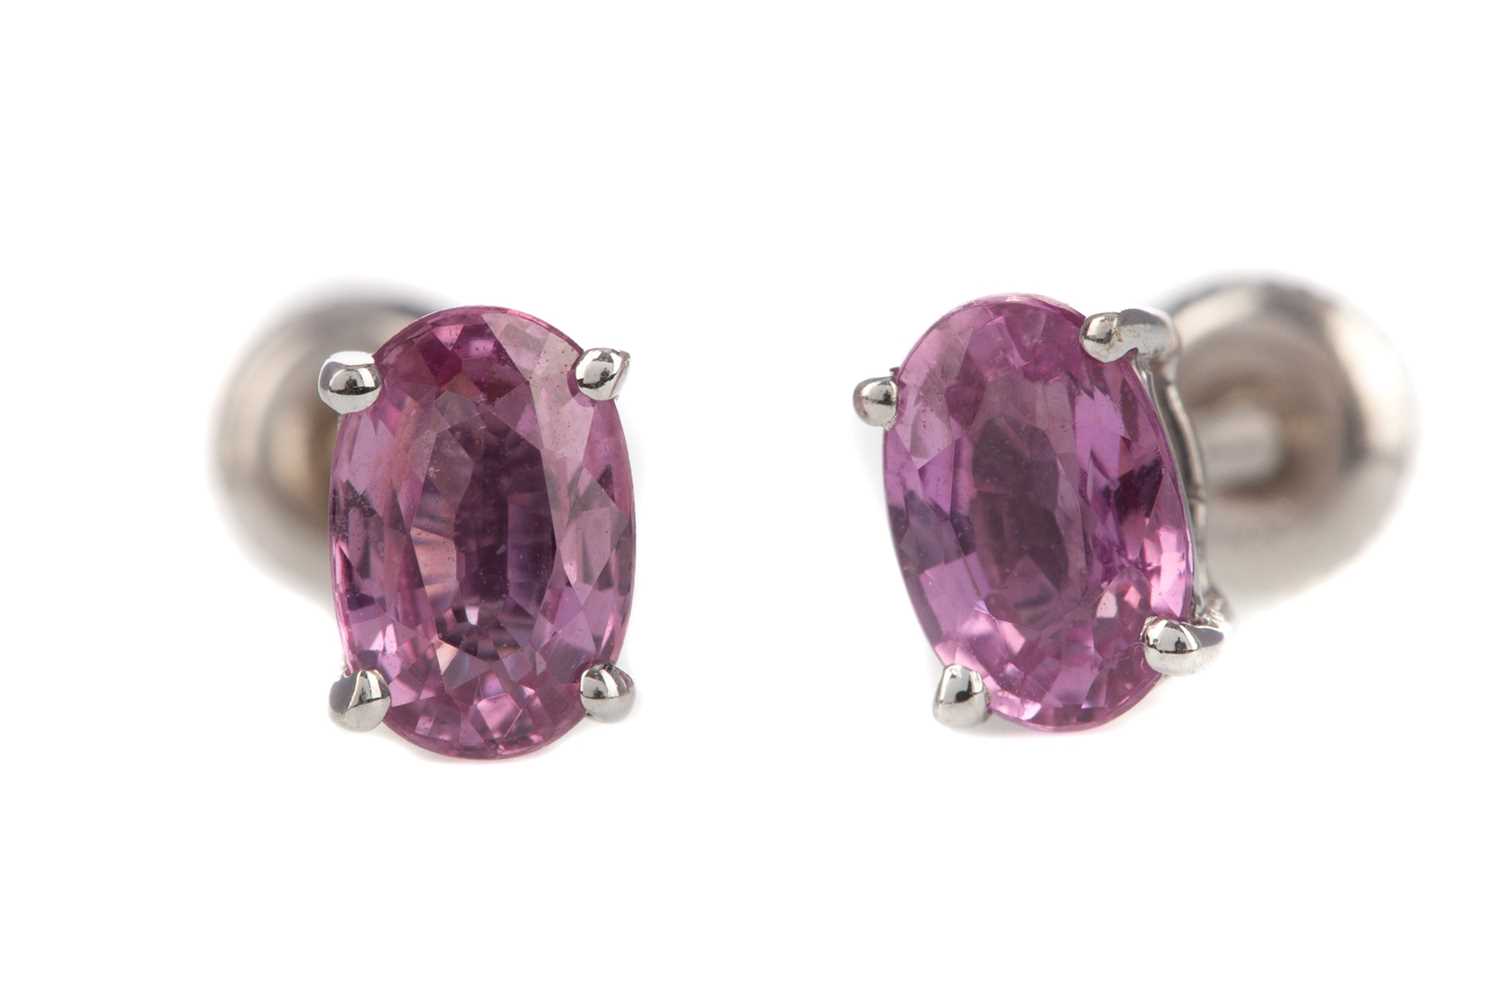 Lot 342 - A PAIR OF PINK SAPPHIRE STUD EARRINGS